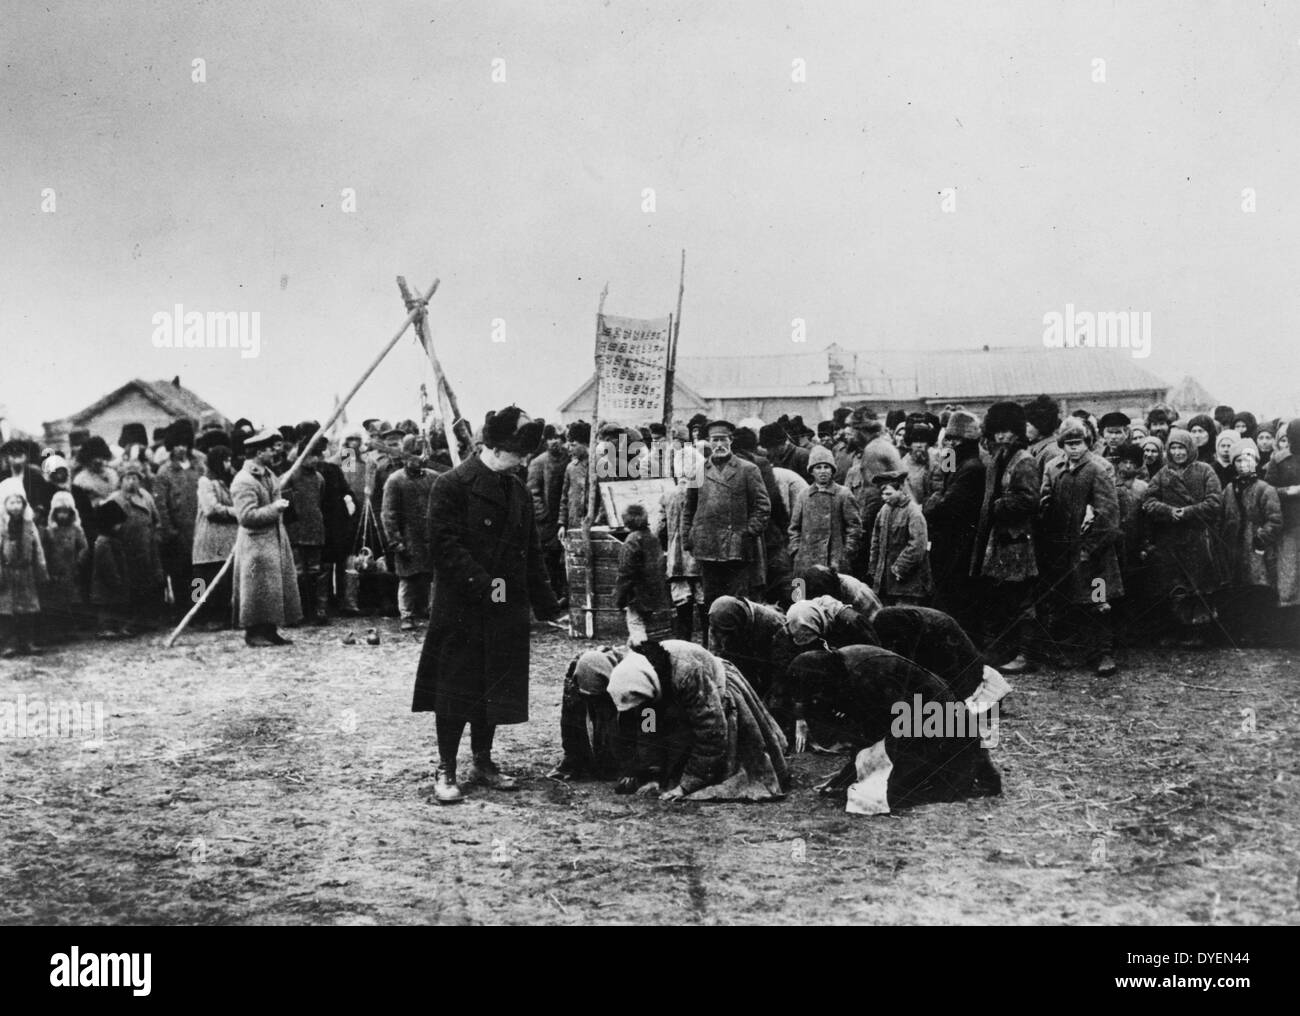 hungry-russian-women-kneel-before-american-relief-administration-officials-DYEN44.jpg